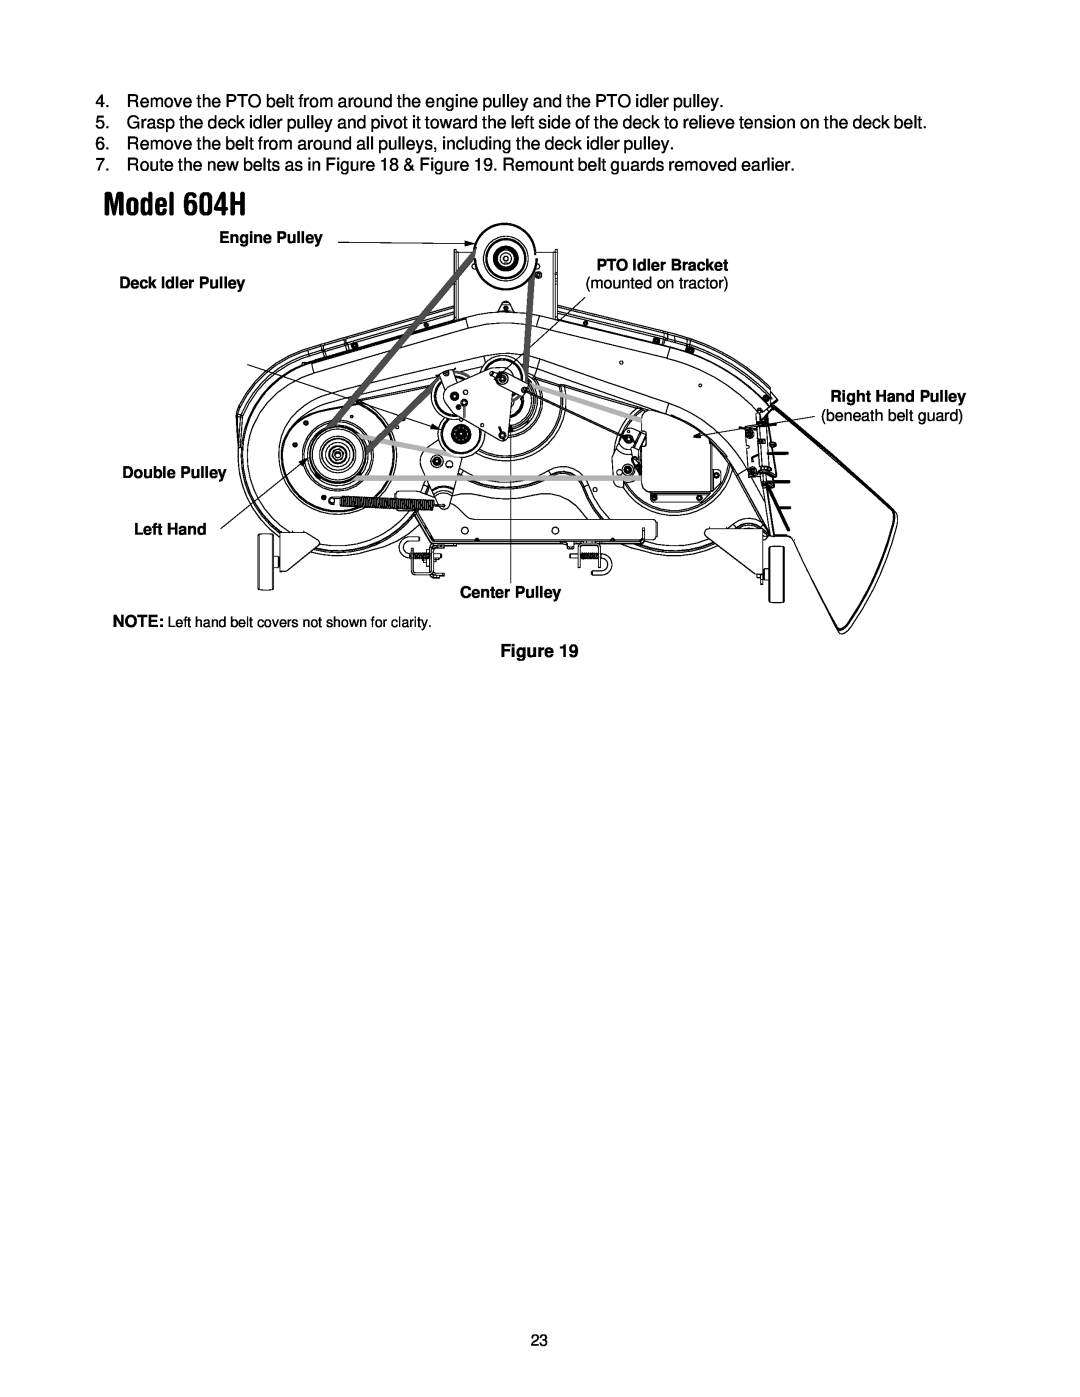 MTD manual Model 604H, Engine Pulley Deck Idler Pulley Double Pulley, Left Hand, PTO Idler Bracket, Right Hand Pulley 